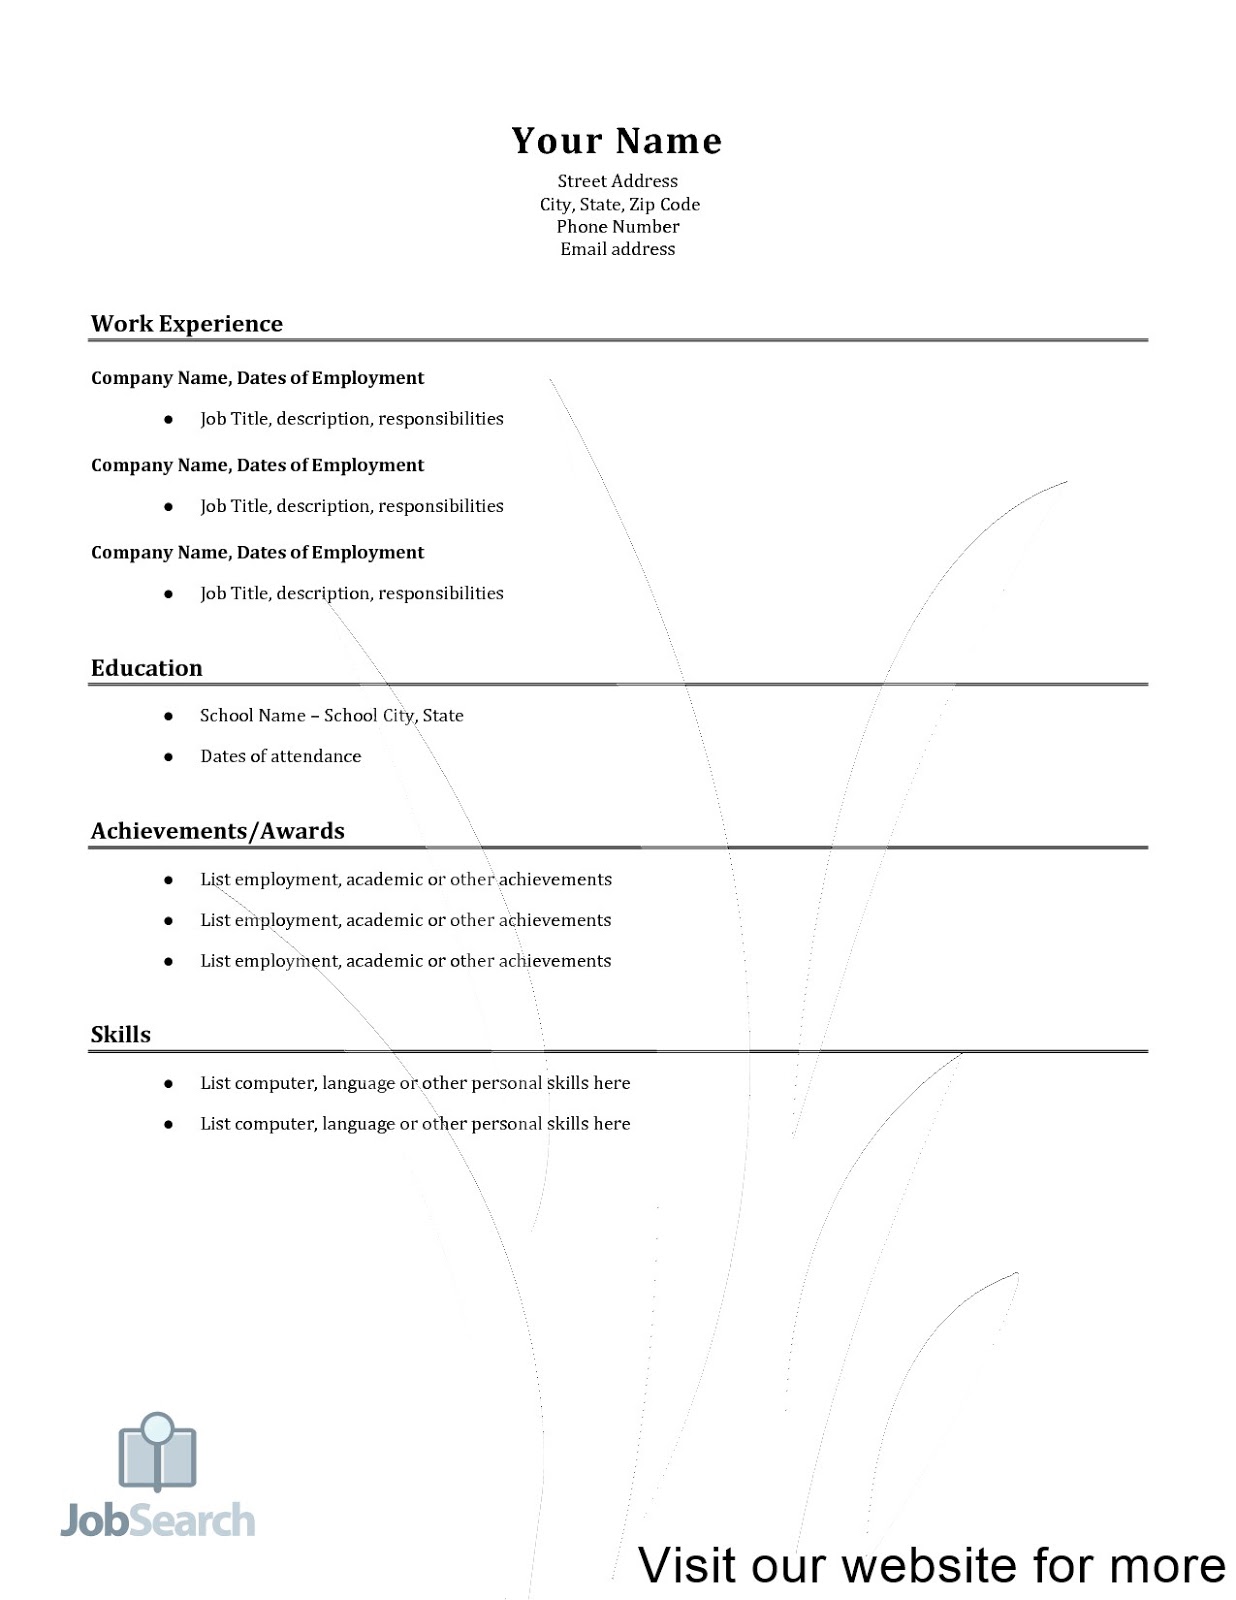 Basic Resumes Examples 22 Resume For Jobs